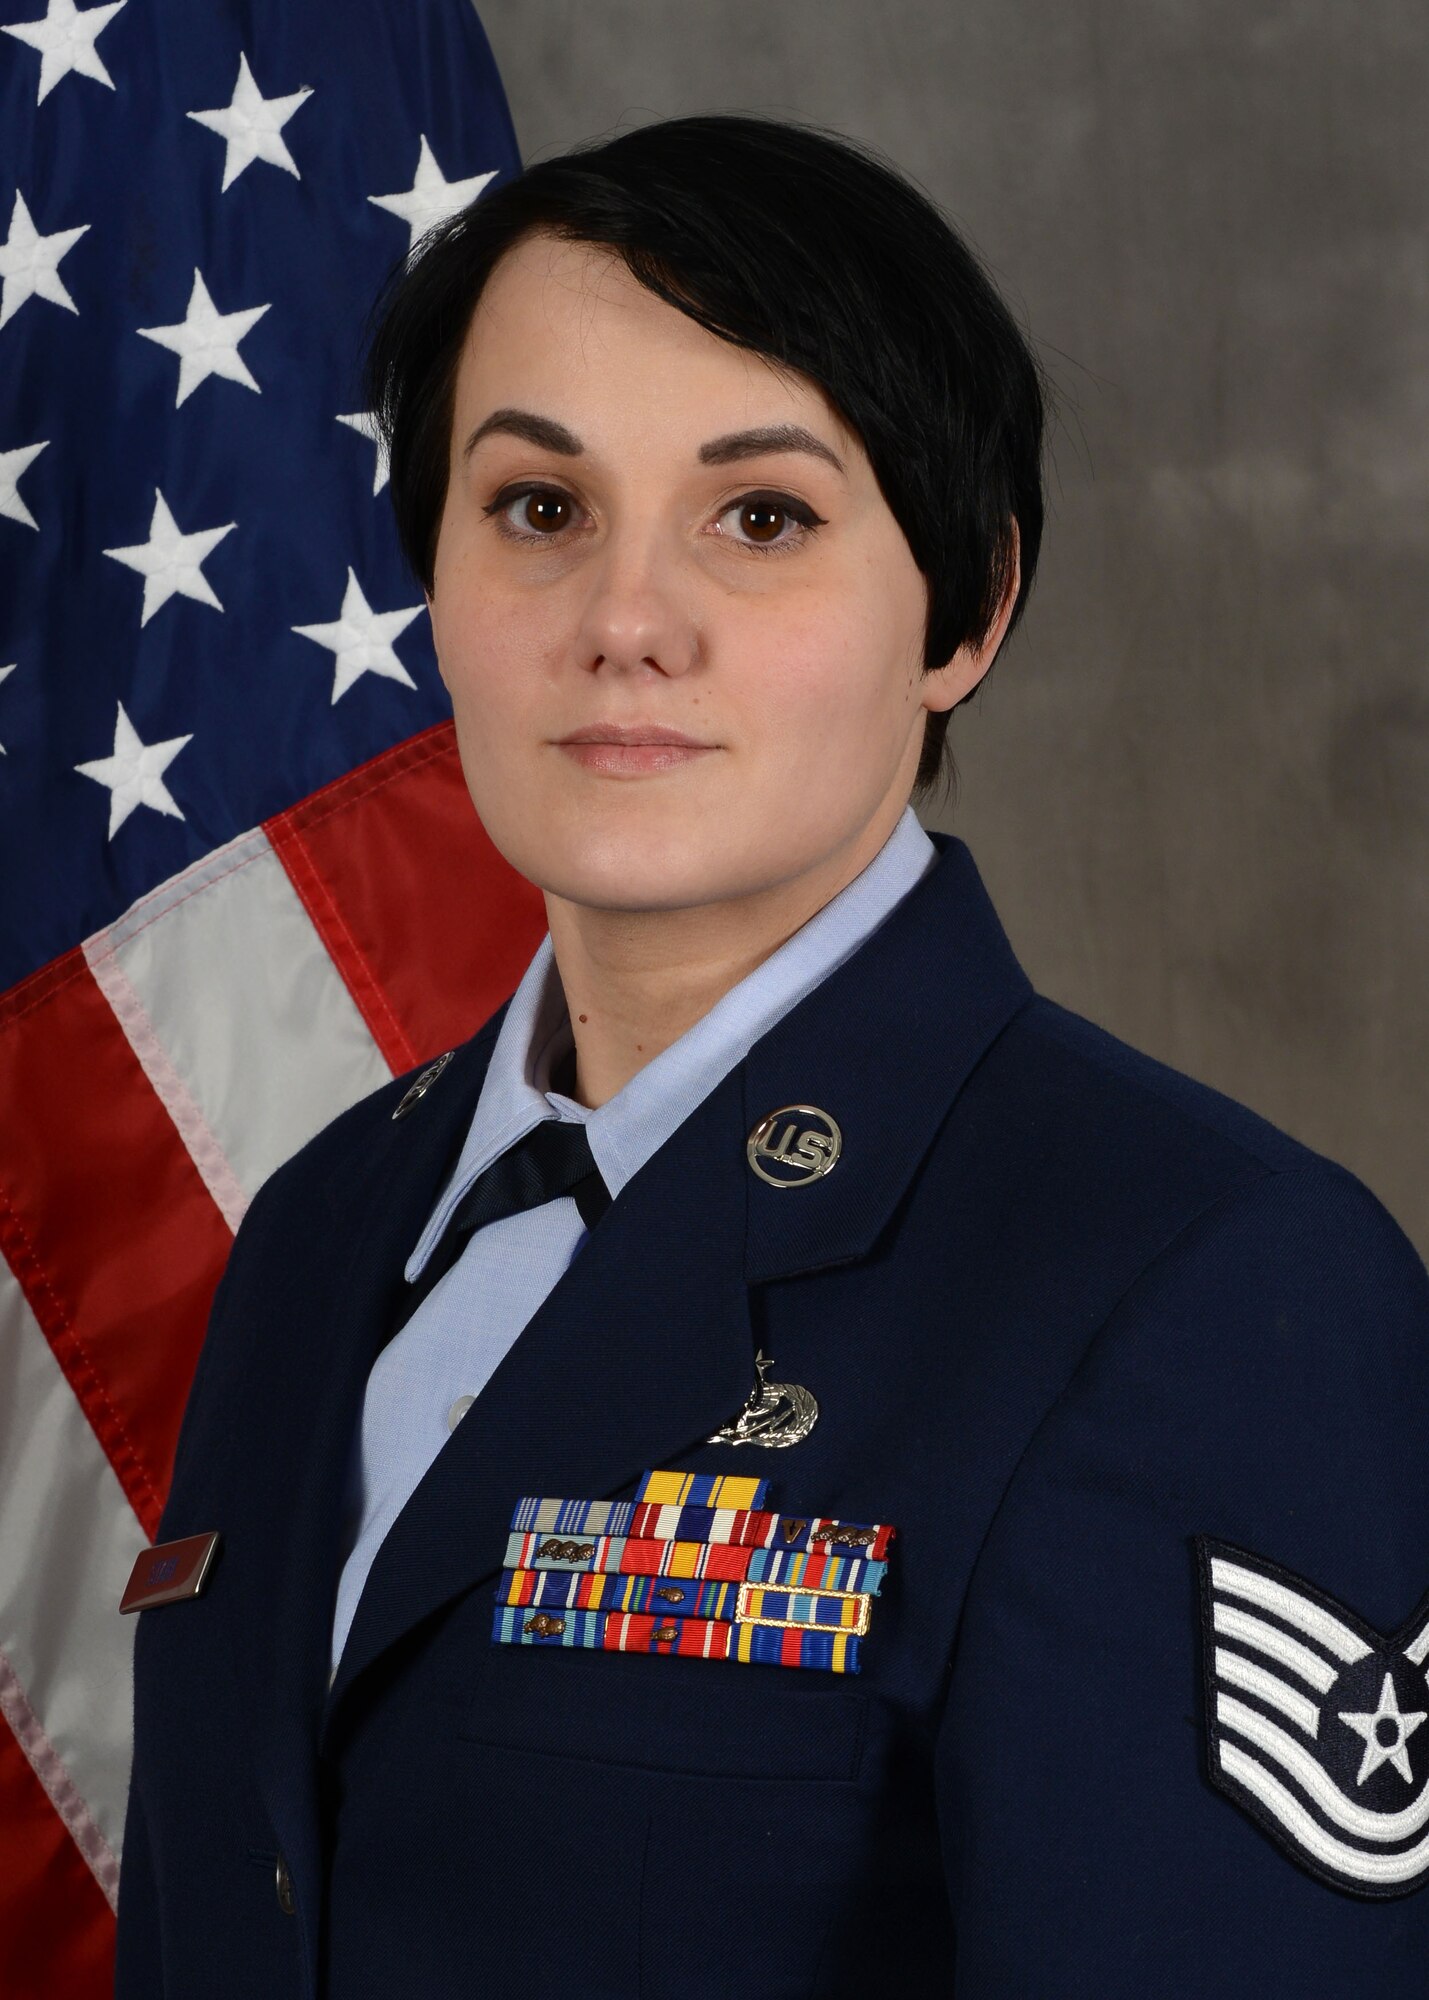 U.S. Air Force Tech. Sgt. Jerrika Stark, 7th Force Support community services technician has overcome a number of difficulties in her childhood, including loss of her guardians, neglect from her mother and teenage homelessness.  Stark lives by the advice her grandmother once told her: “No matter what you’re going through or how hard it is, it’s only one moment in your life. You can get through it, I promise. After you get through this moment, the next moment is yours to take and just keep going with it.” (U.S. Air Force photo by Airman 1st Class Austin Mayfield)